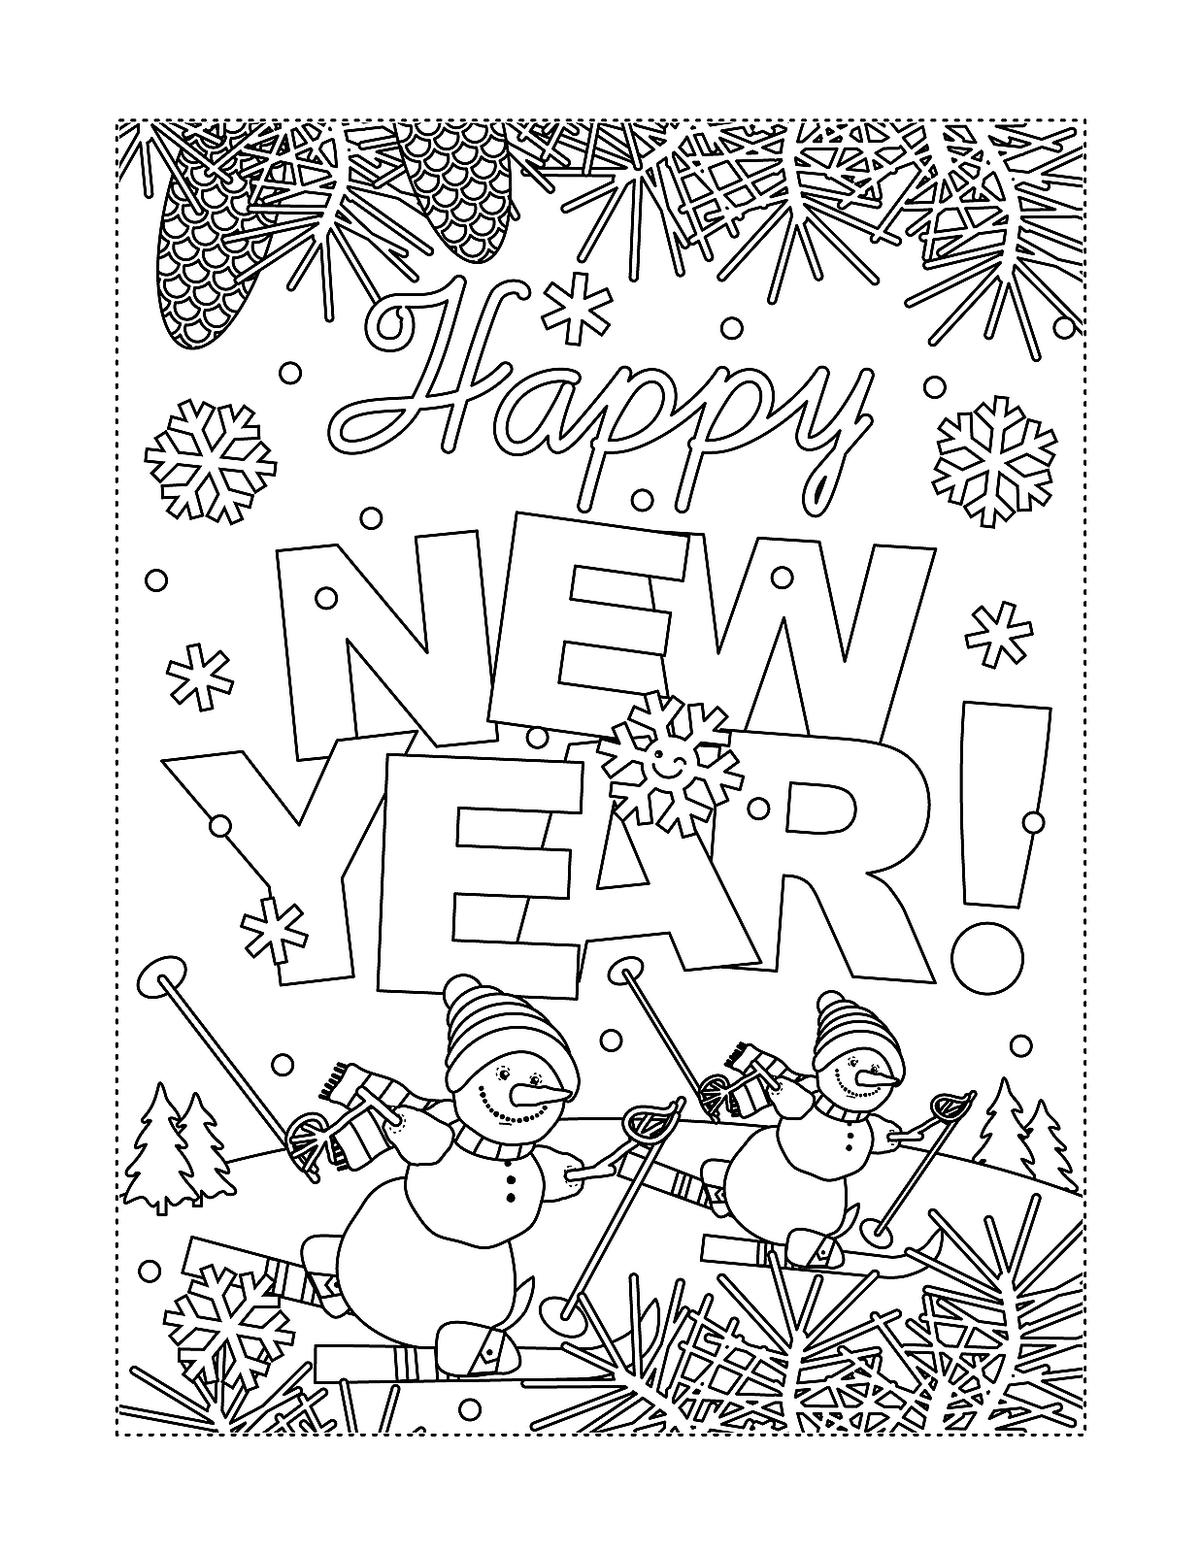 Welcome Coloring Pages New Year January Coloring Pages Printable Fun To Help Kids